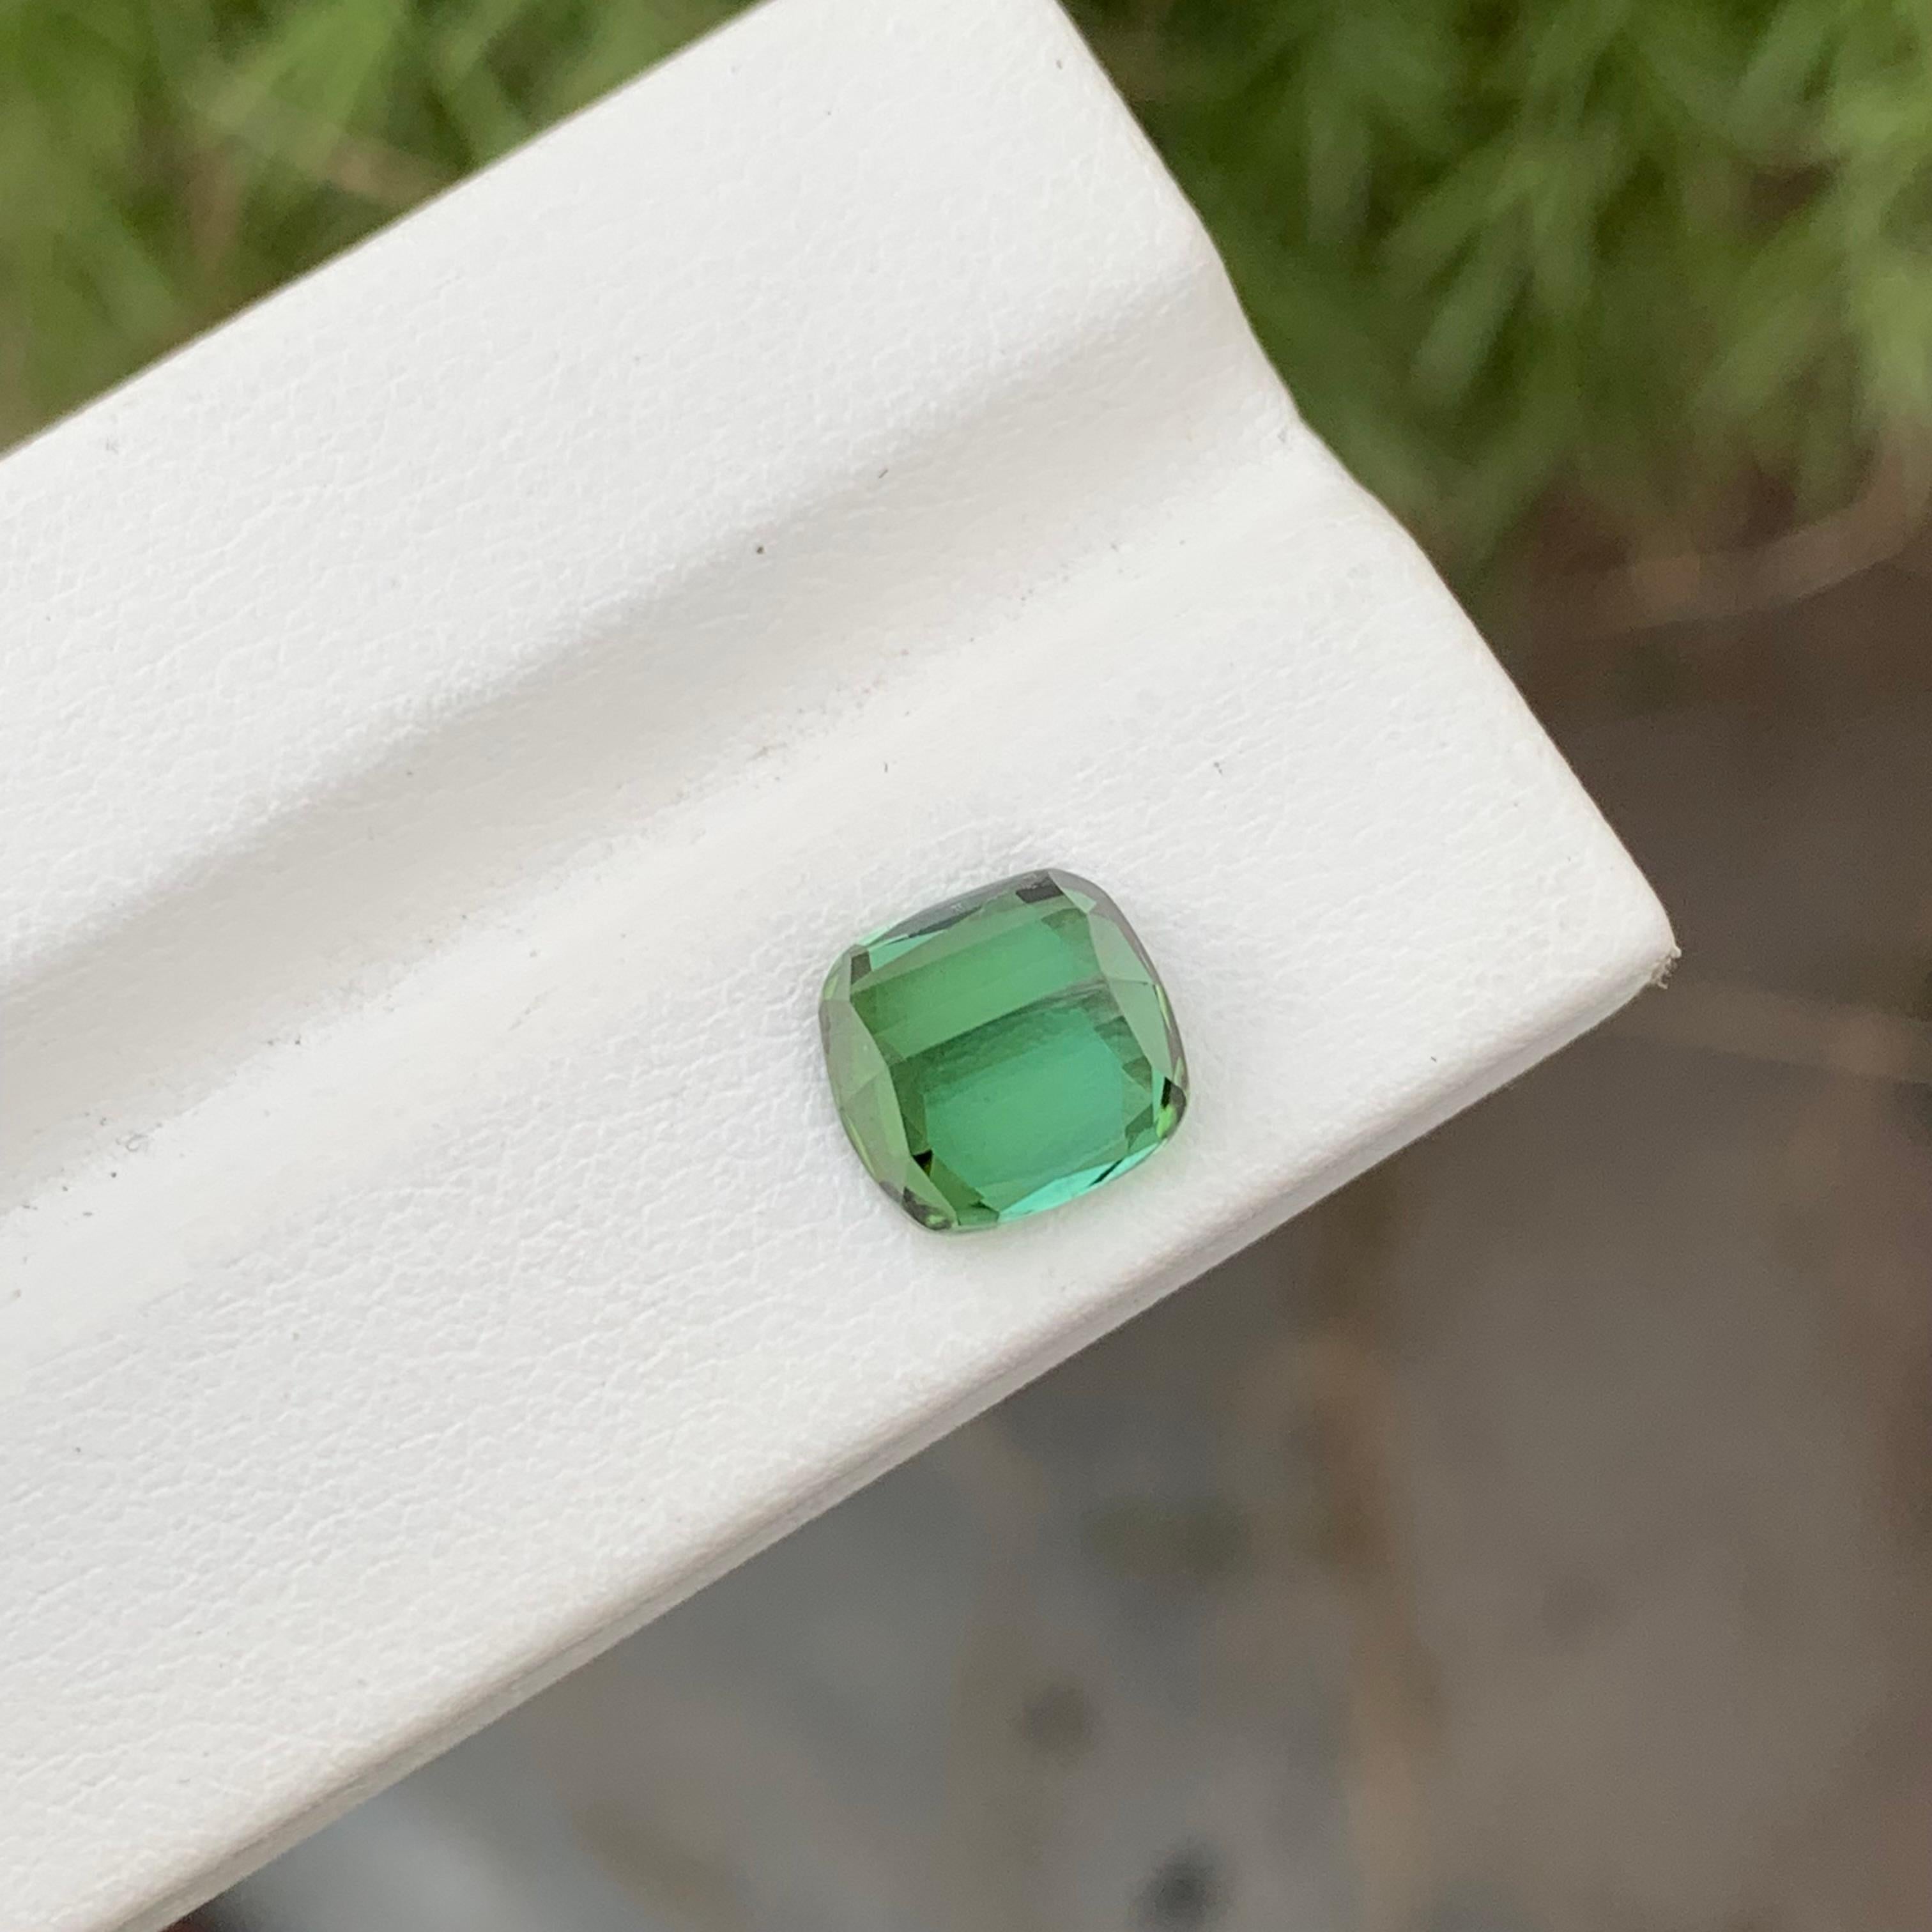 Loose Tourmaline 
Weight: 3.35 Carats 
Dimension: 8.8x8.3x5.8 Mm
Origin; Kunar Afghanistan 
Shape: Cushion
Color: Mint 
Treatment: Non
Certificate: On Customer Demand
Mint Green Tourmaline, a delicate and refreshing gemstone, entices admirers with